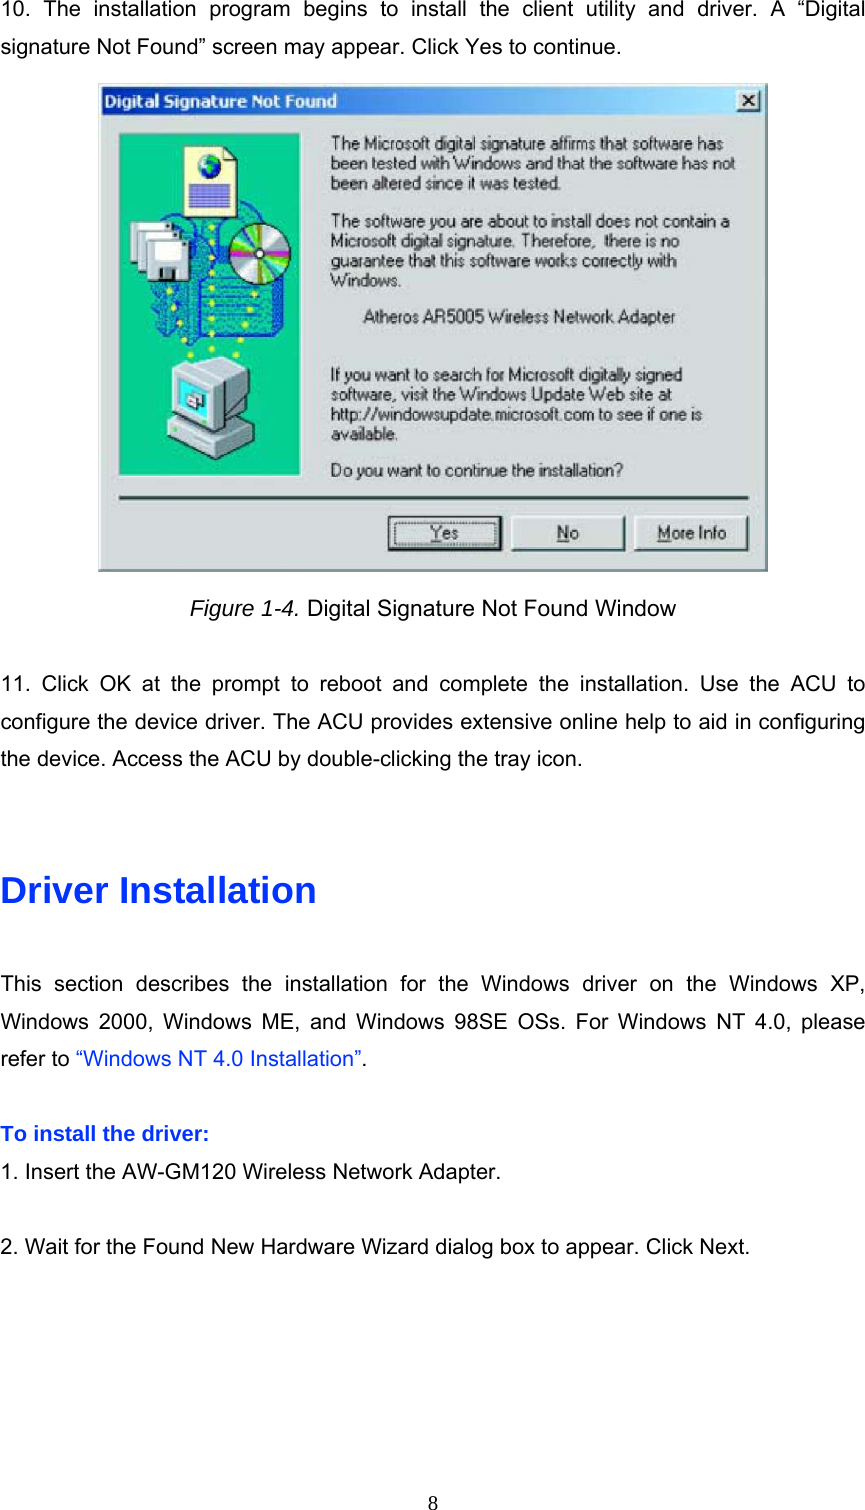 10. The installation program begins to install the client utility and driver. A “Digital signature Not Found” screen may appear. Click Yes to continue.  Figure 1-4. Digital Signature Not Found Window  11. Click OK at the prompt to reboot and complete the installation. Use the ACU to configure the device driver. The ACU provides extensive online help to aid in configuring the device. Access the ACU by double-clicking the tray icon.   Driver Installation  This section describes the installation for the Windows driver on the Windows XP, Windows 2000, Windows ME, and Windows 98SE OSs. For Windows NT 4.0, please refer to “Windows NT 4.0 Installation”.  To install the driver: 1. Insert the AW-GM120 Wireless Network Adapter.  2. Wait for the Found New Hardware Wizard dialog box to appear. Click Next.  8